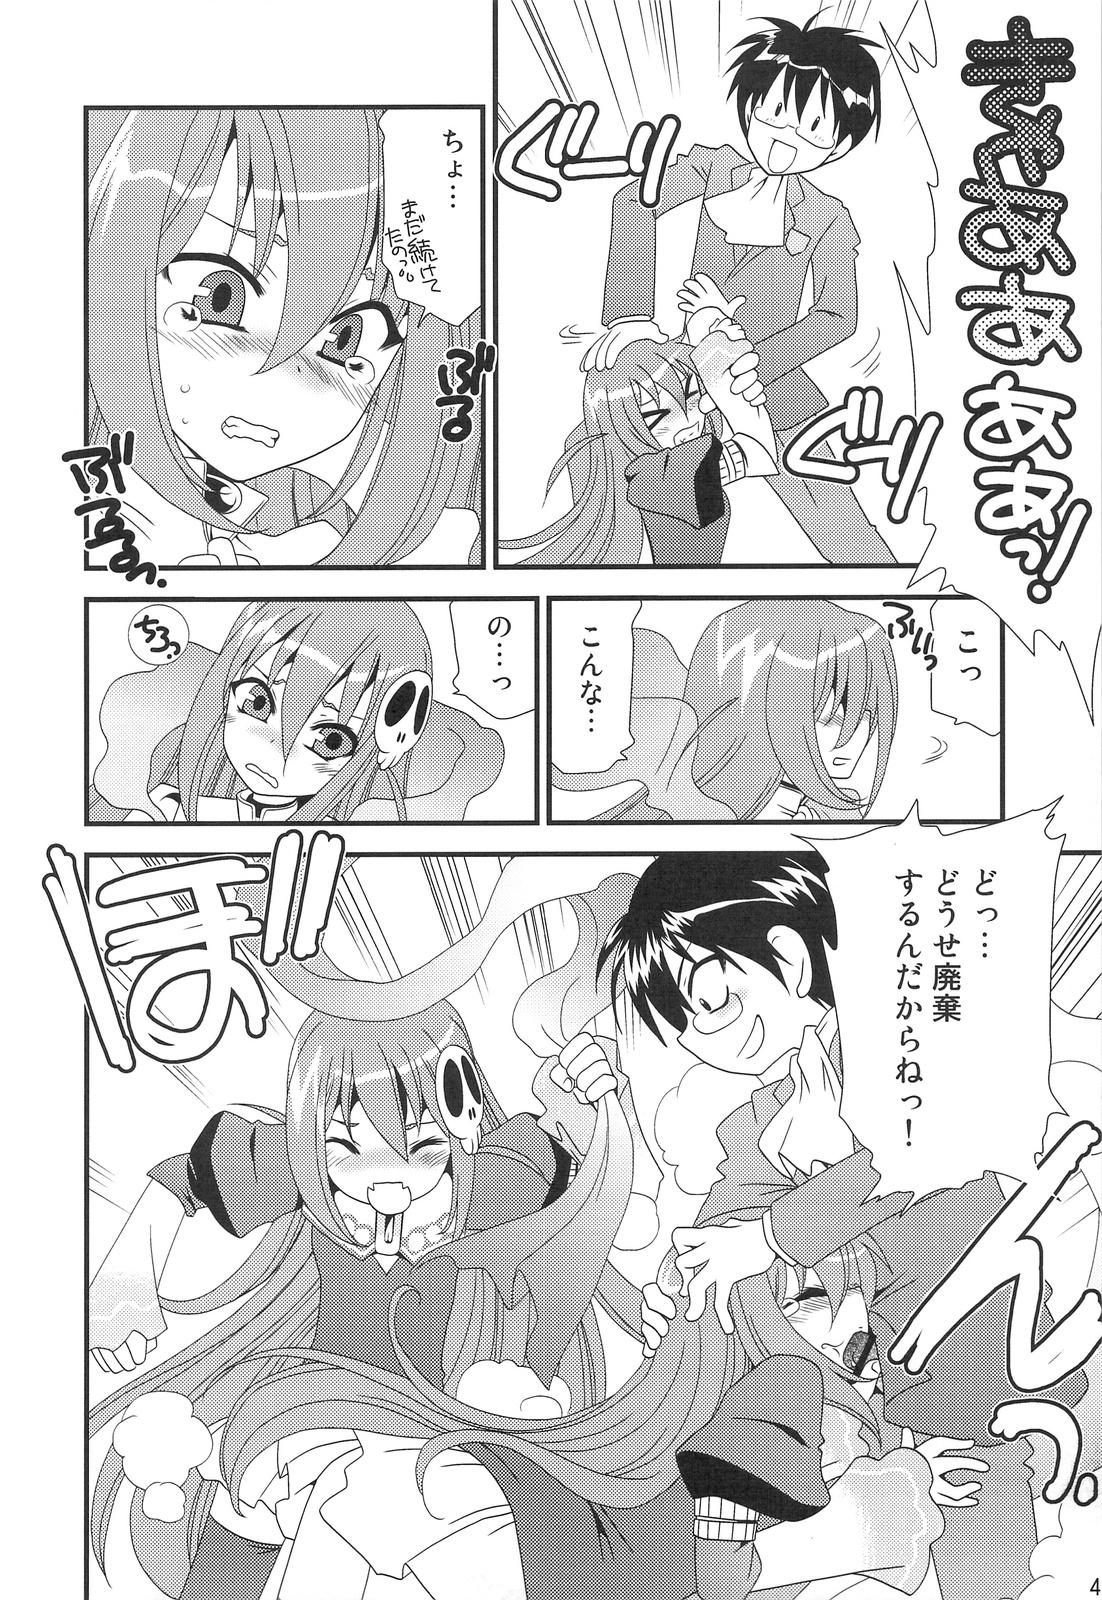 Blows Kami Shiru - The world god only knows Kitchen - Page 3